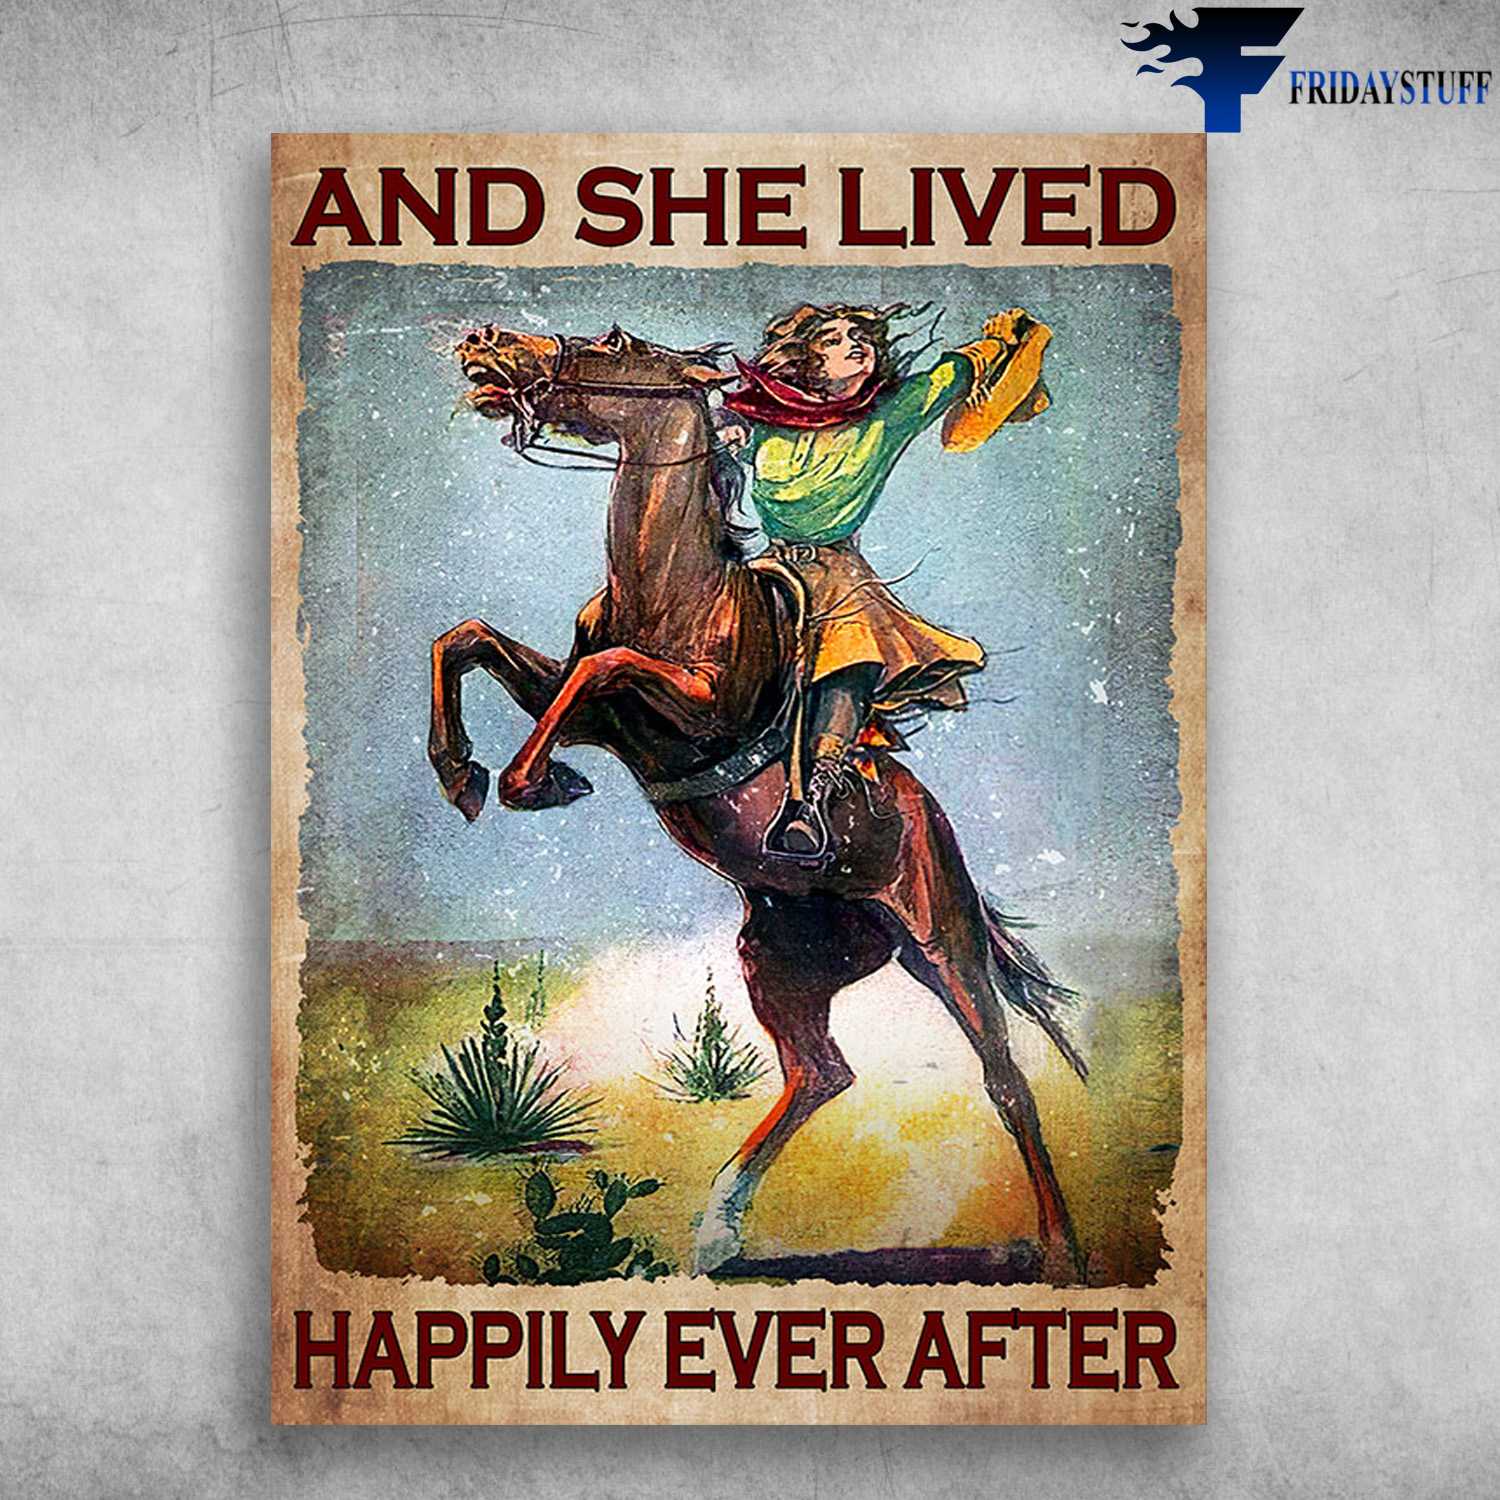 Girl Riding Horse, Riding Poster - And She Lived, Happily Ever After